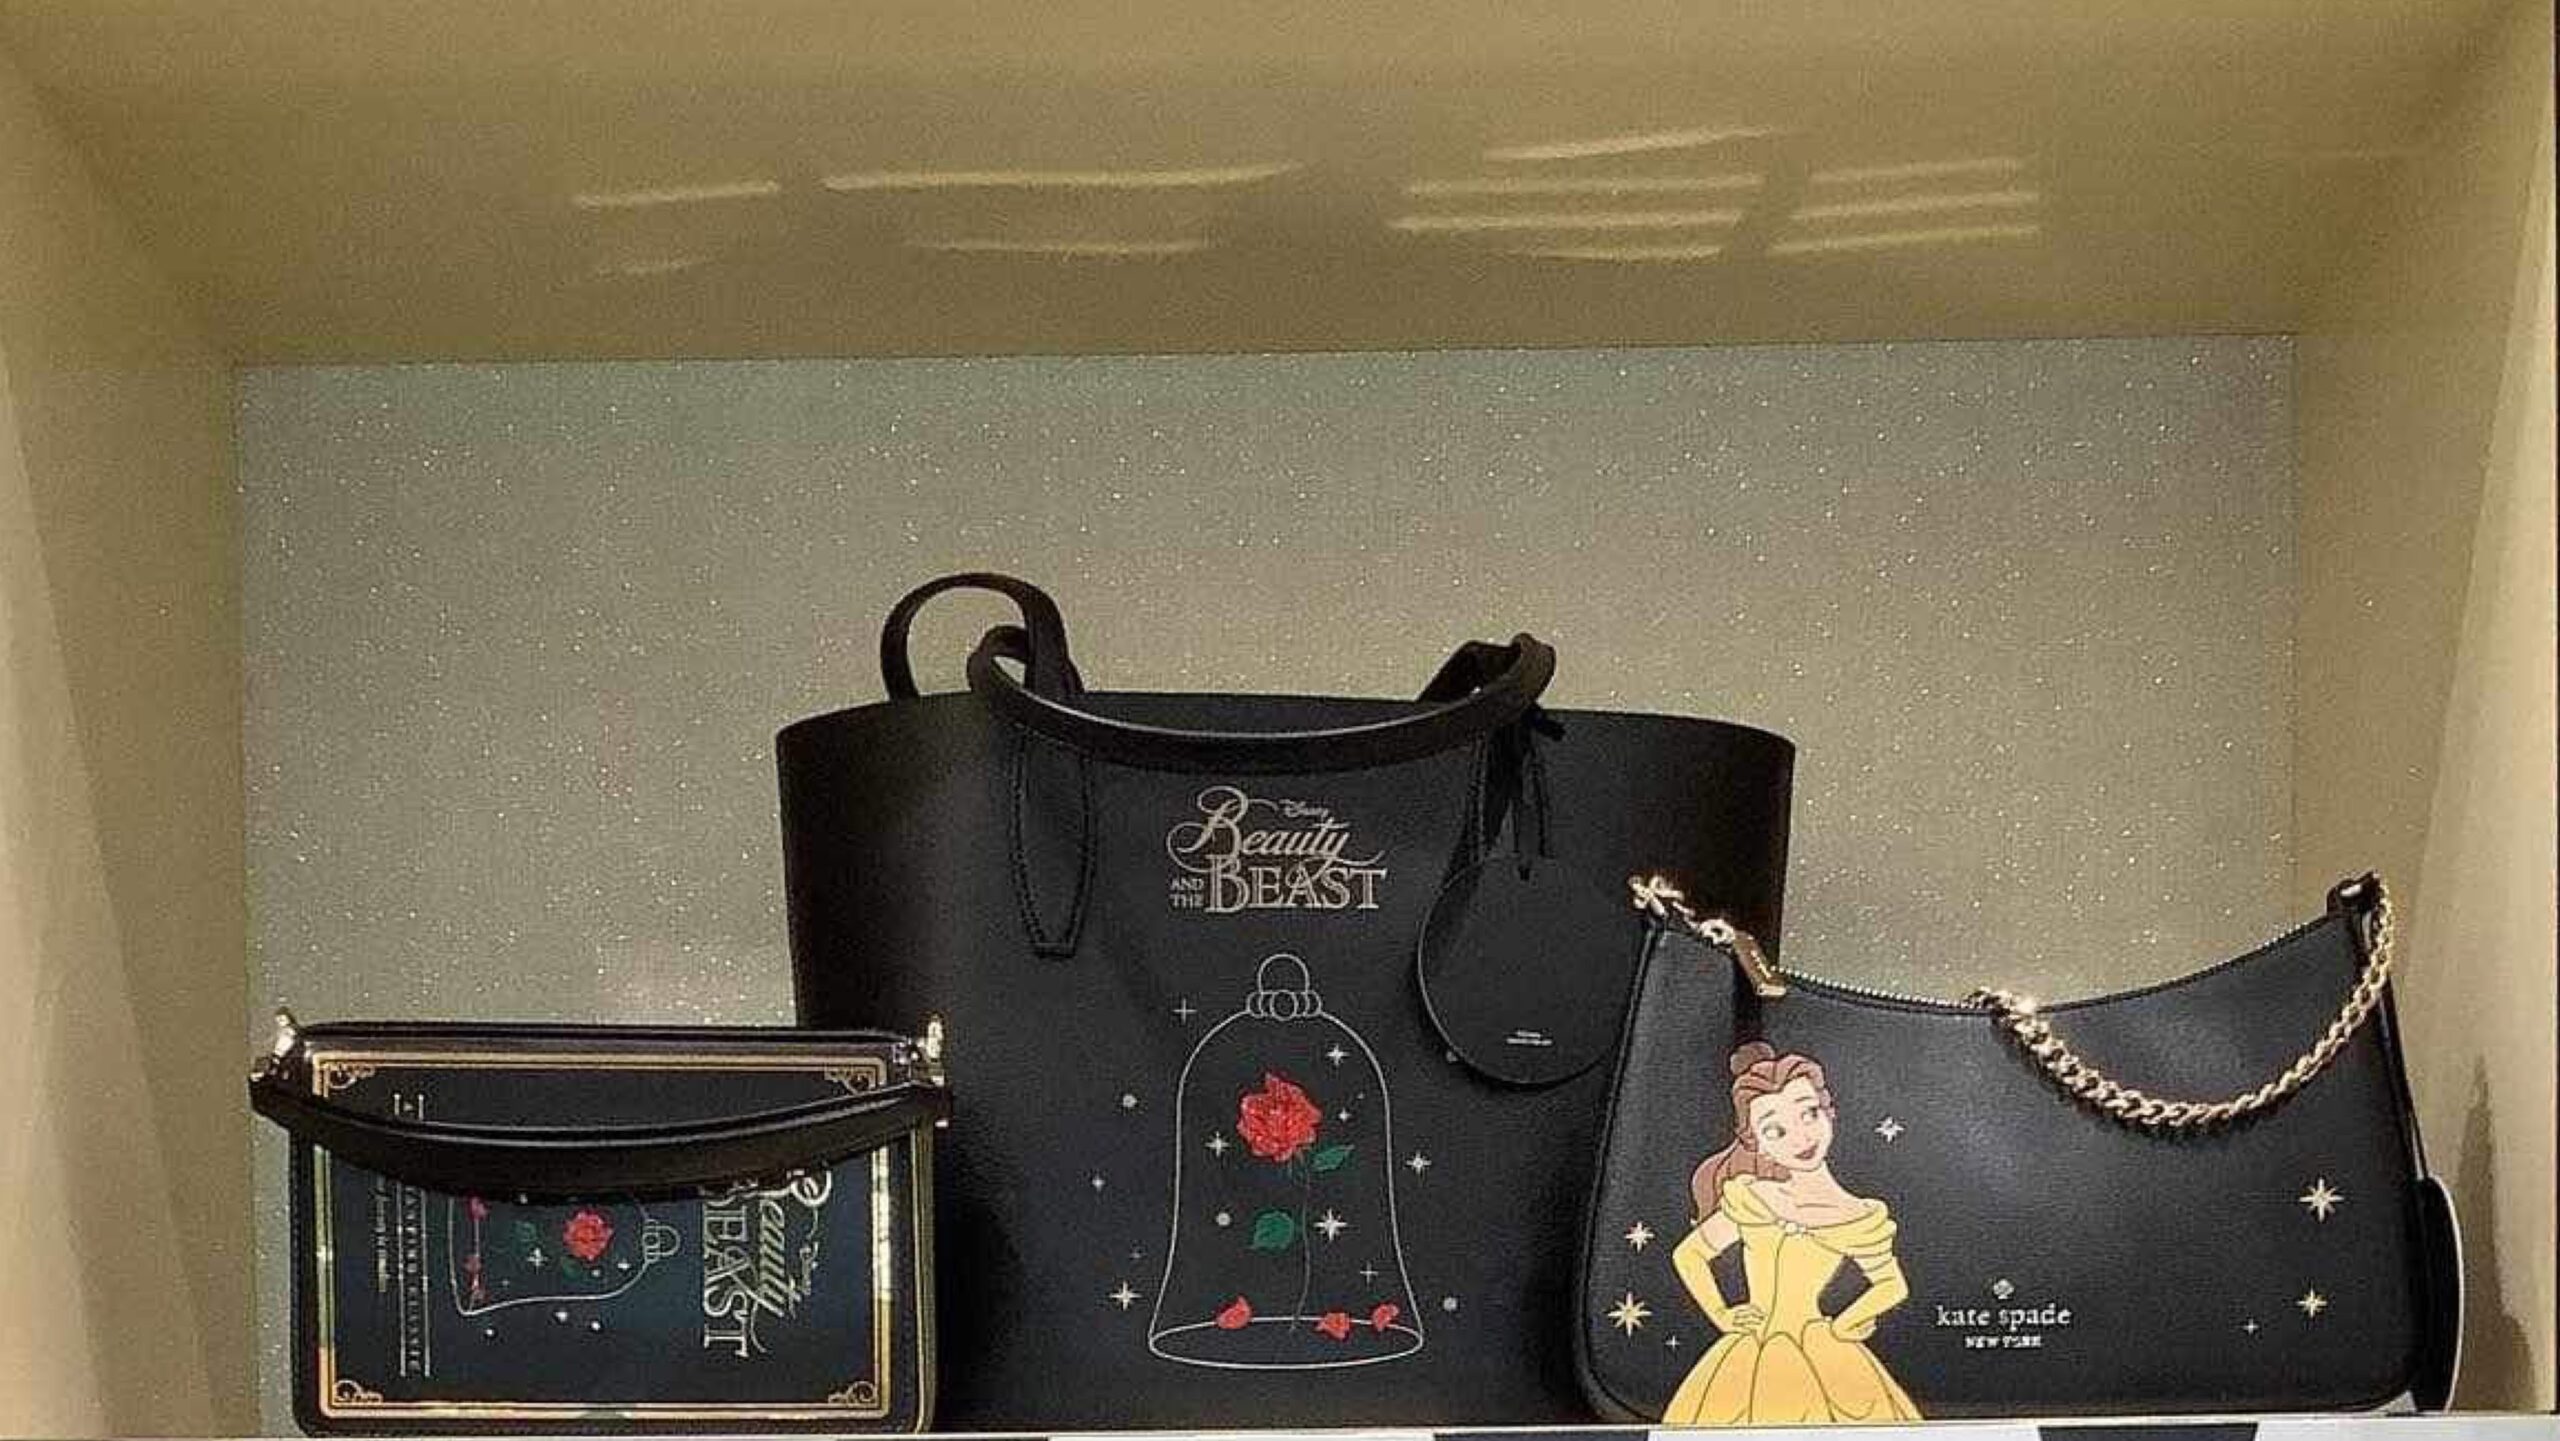 New Kate Spade Disney100 Collection Available Now at Walt Disney